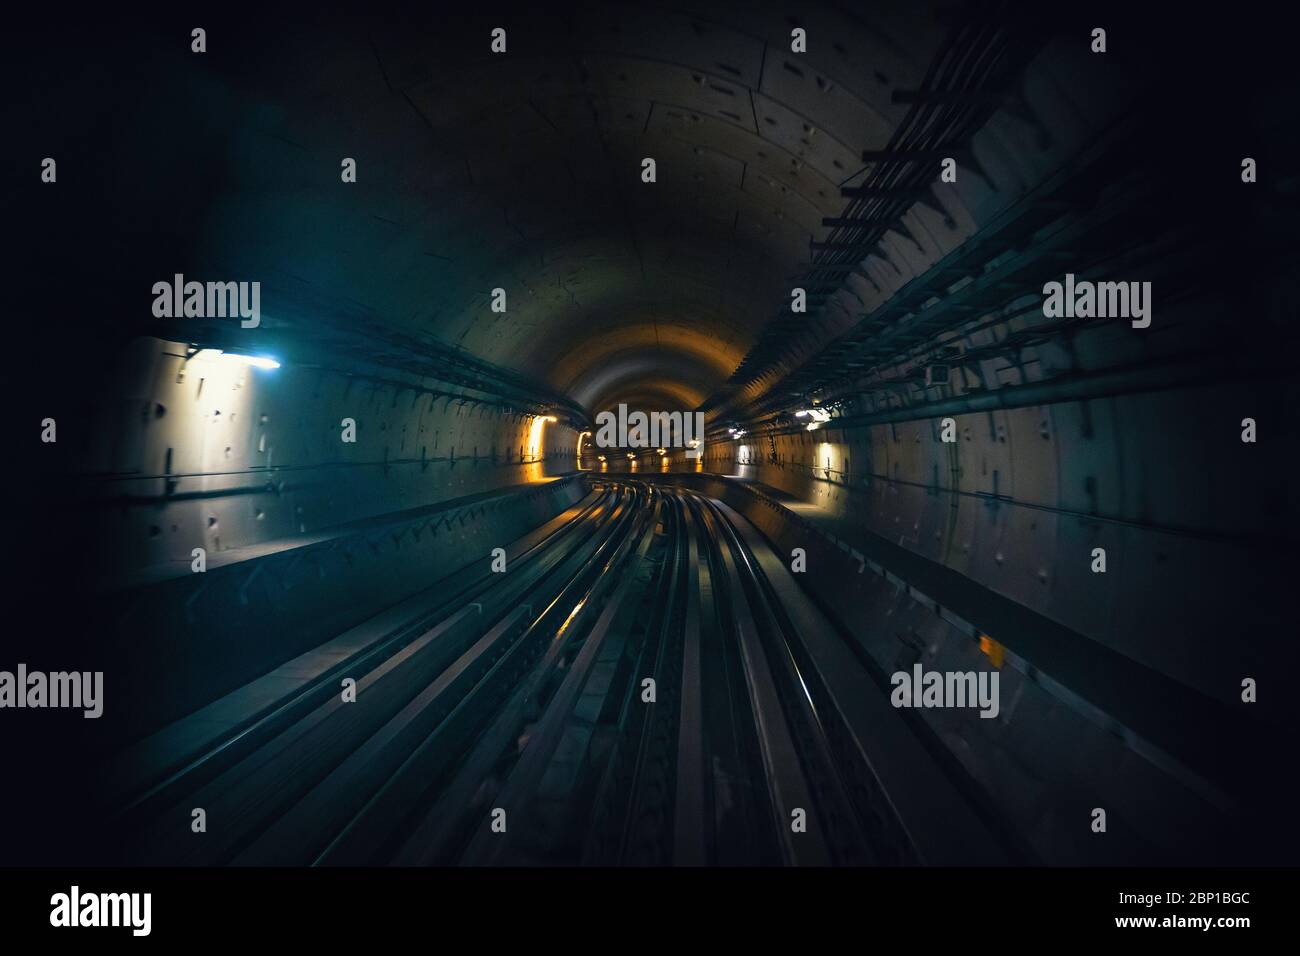 Dubai metro tunnel in blurred motion, view from first wagon, subway tracks. Stock Photo